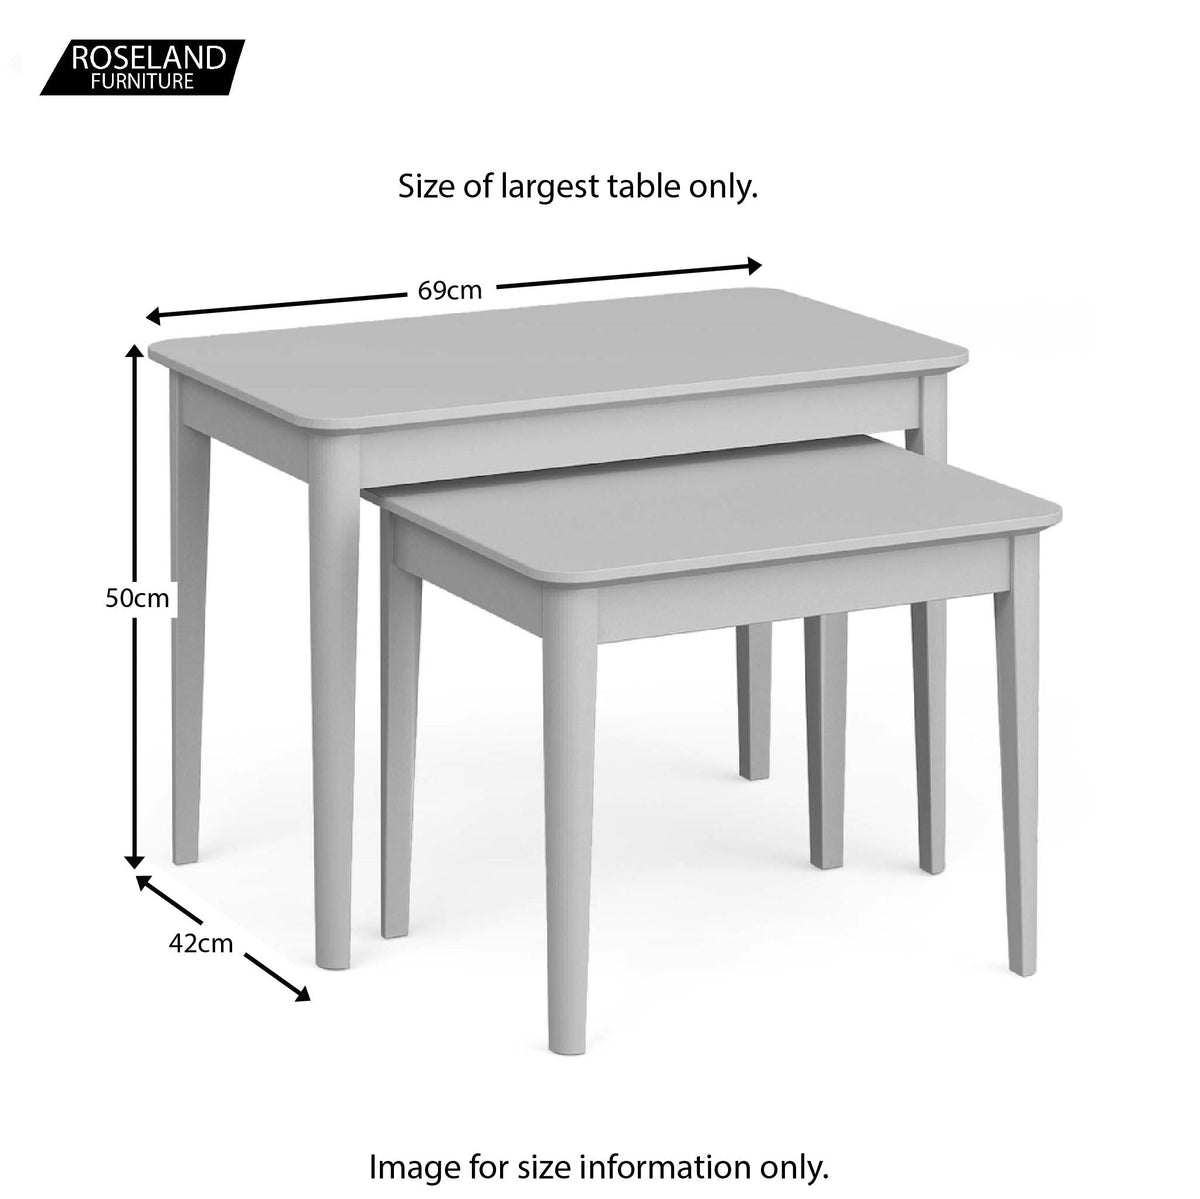 Elgin Grey Nest of Tables size guide